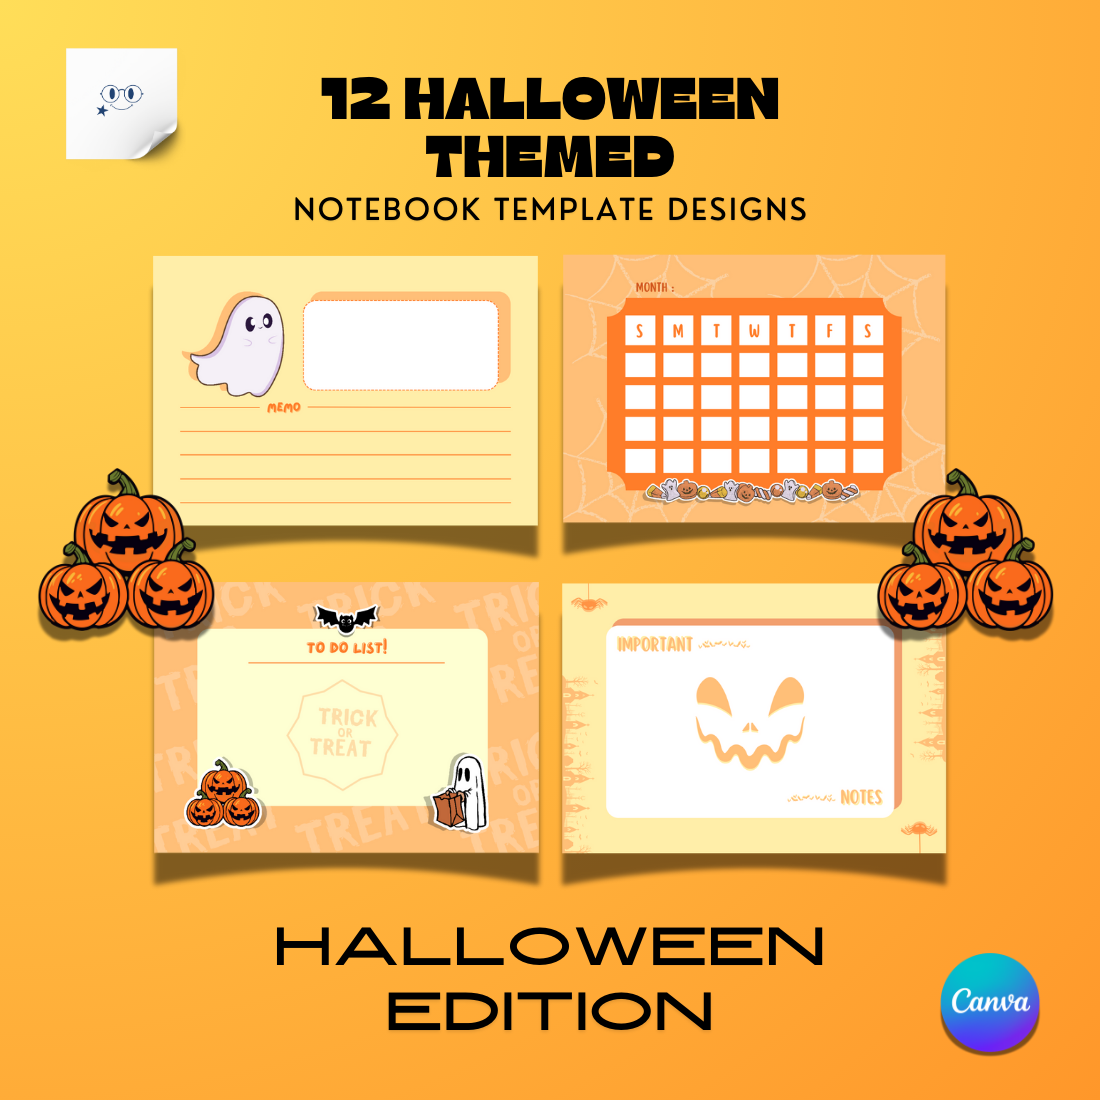 12 Cute Halloween Notebook and Planner Templates - Only 8 preview image.